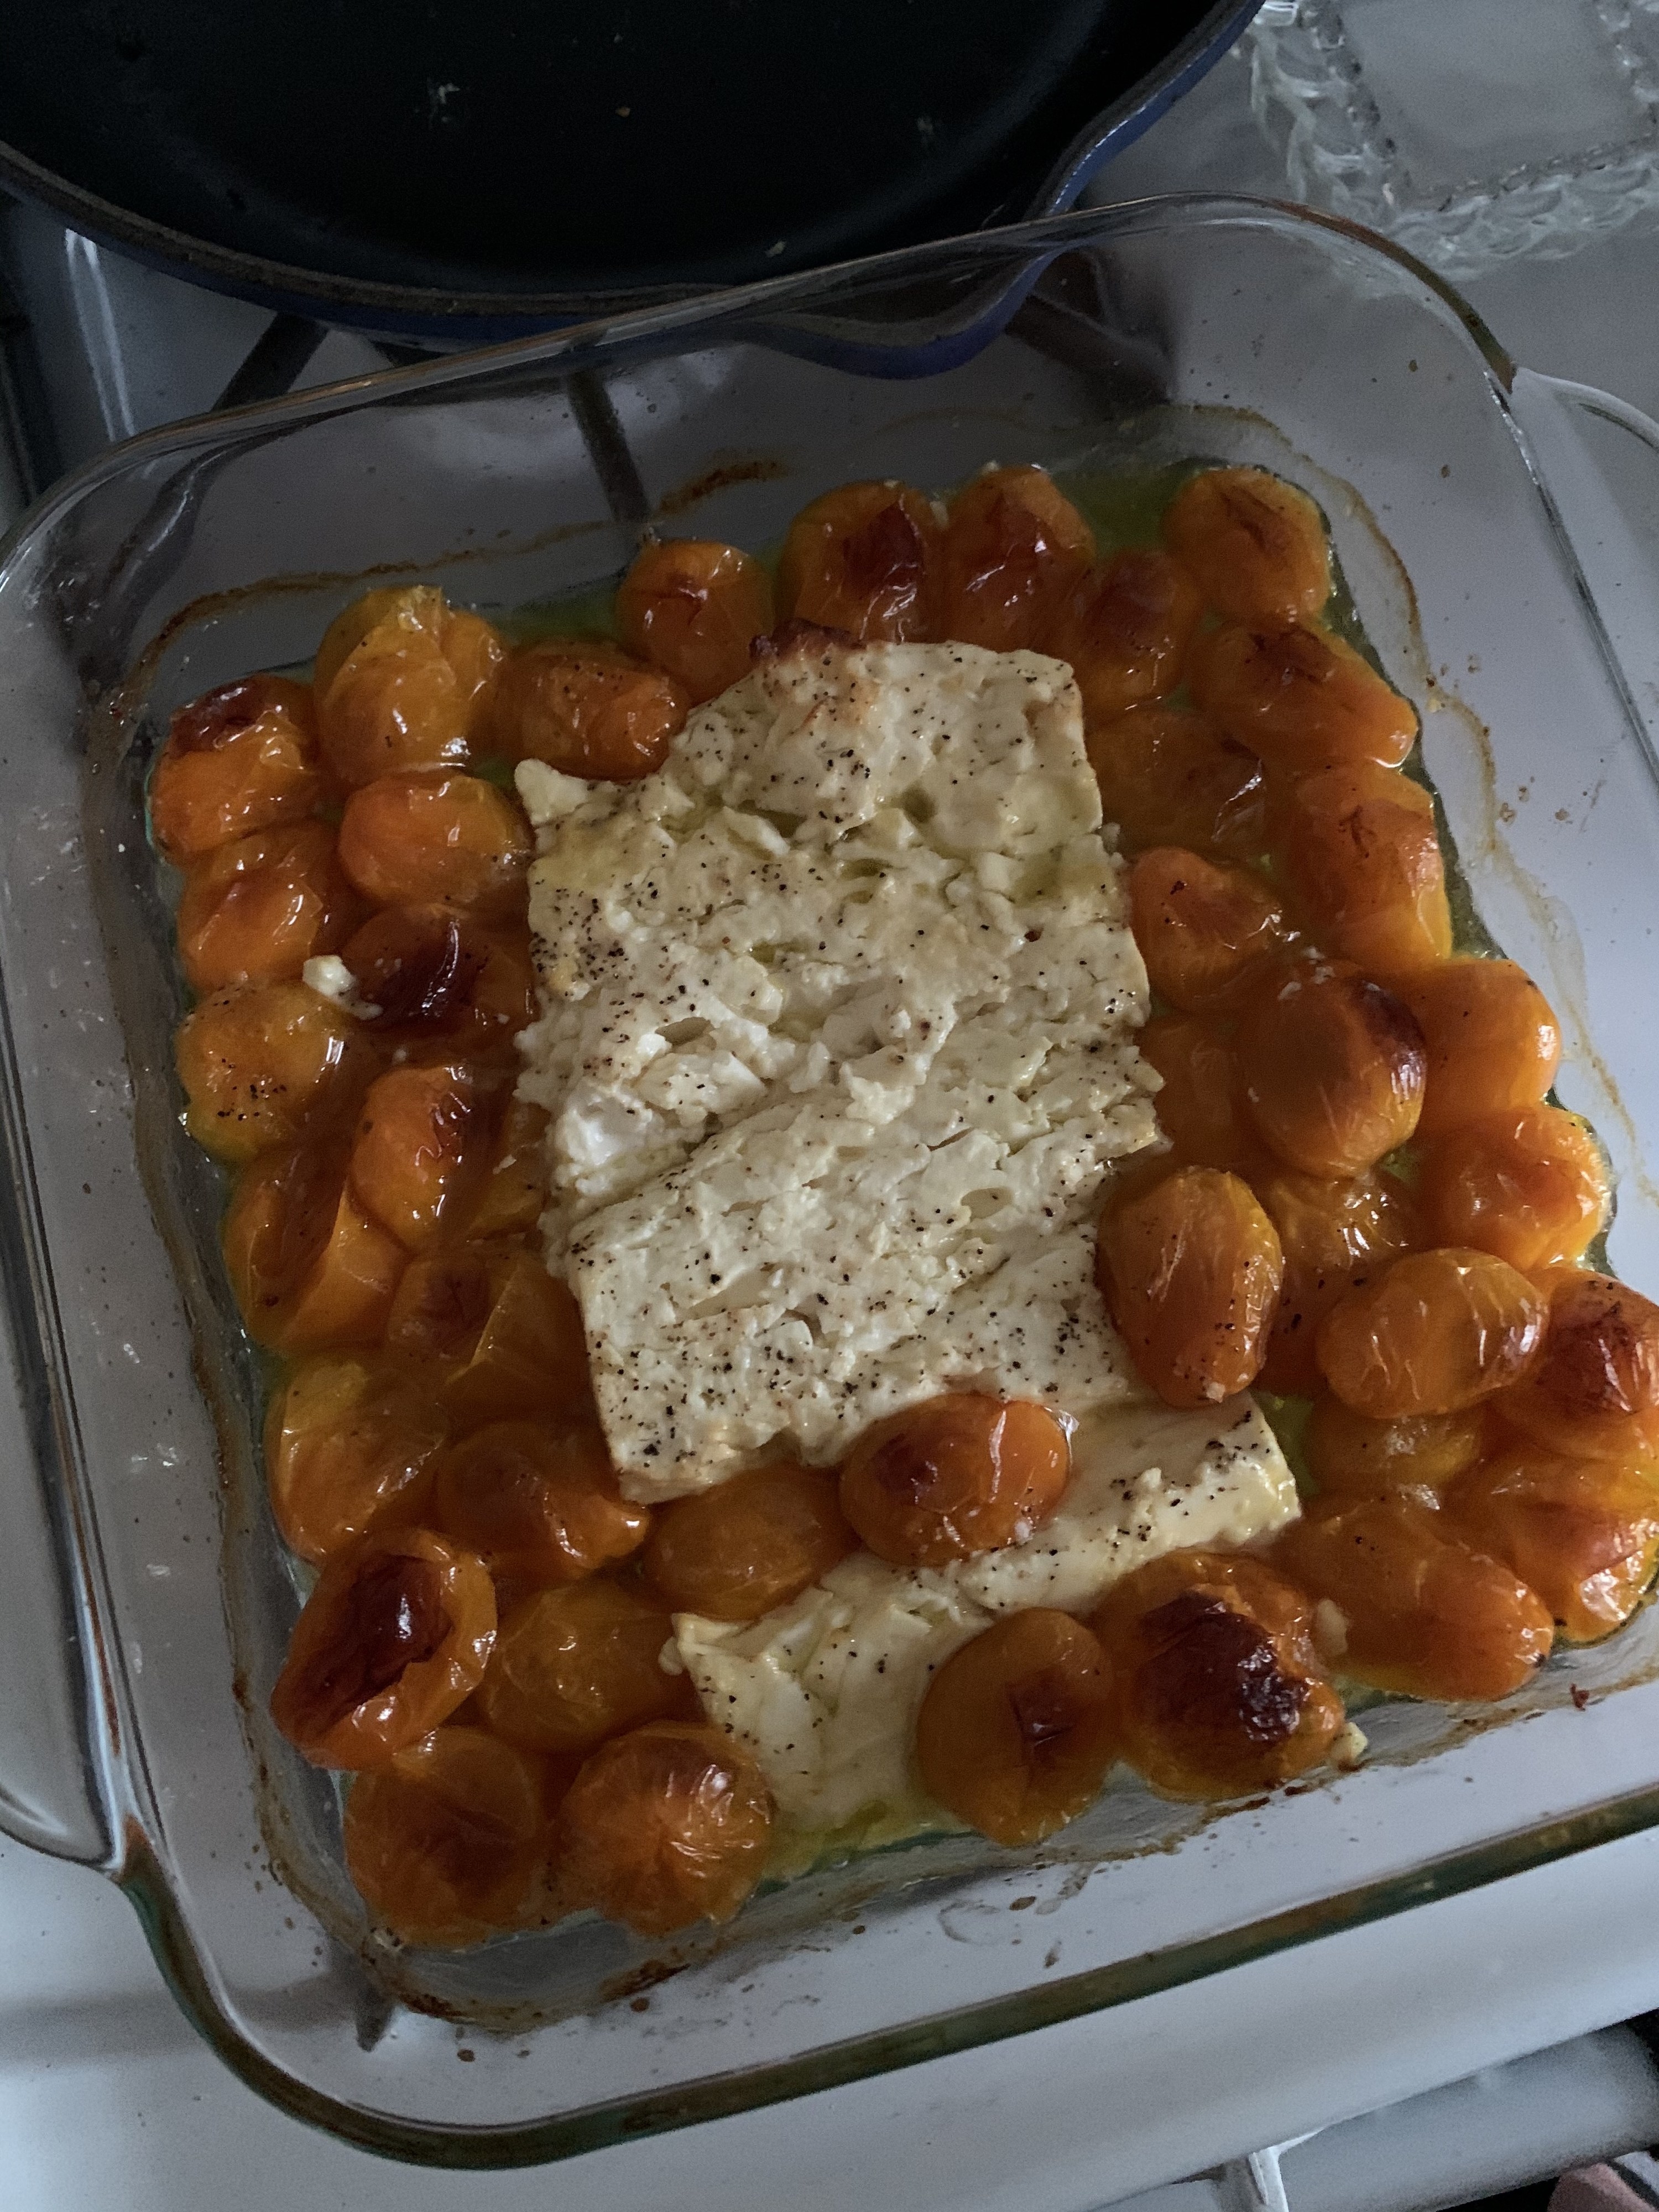 An image of baked feta cheese with tomatoes just out of the oven